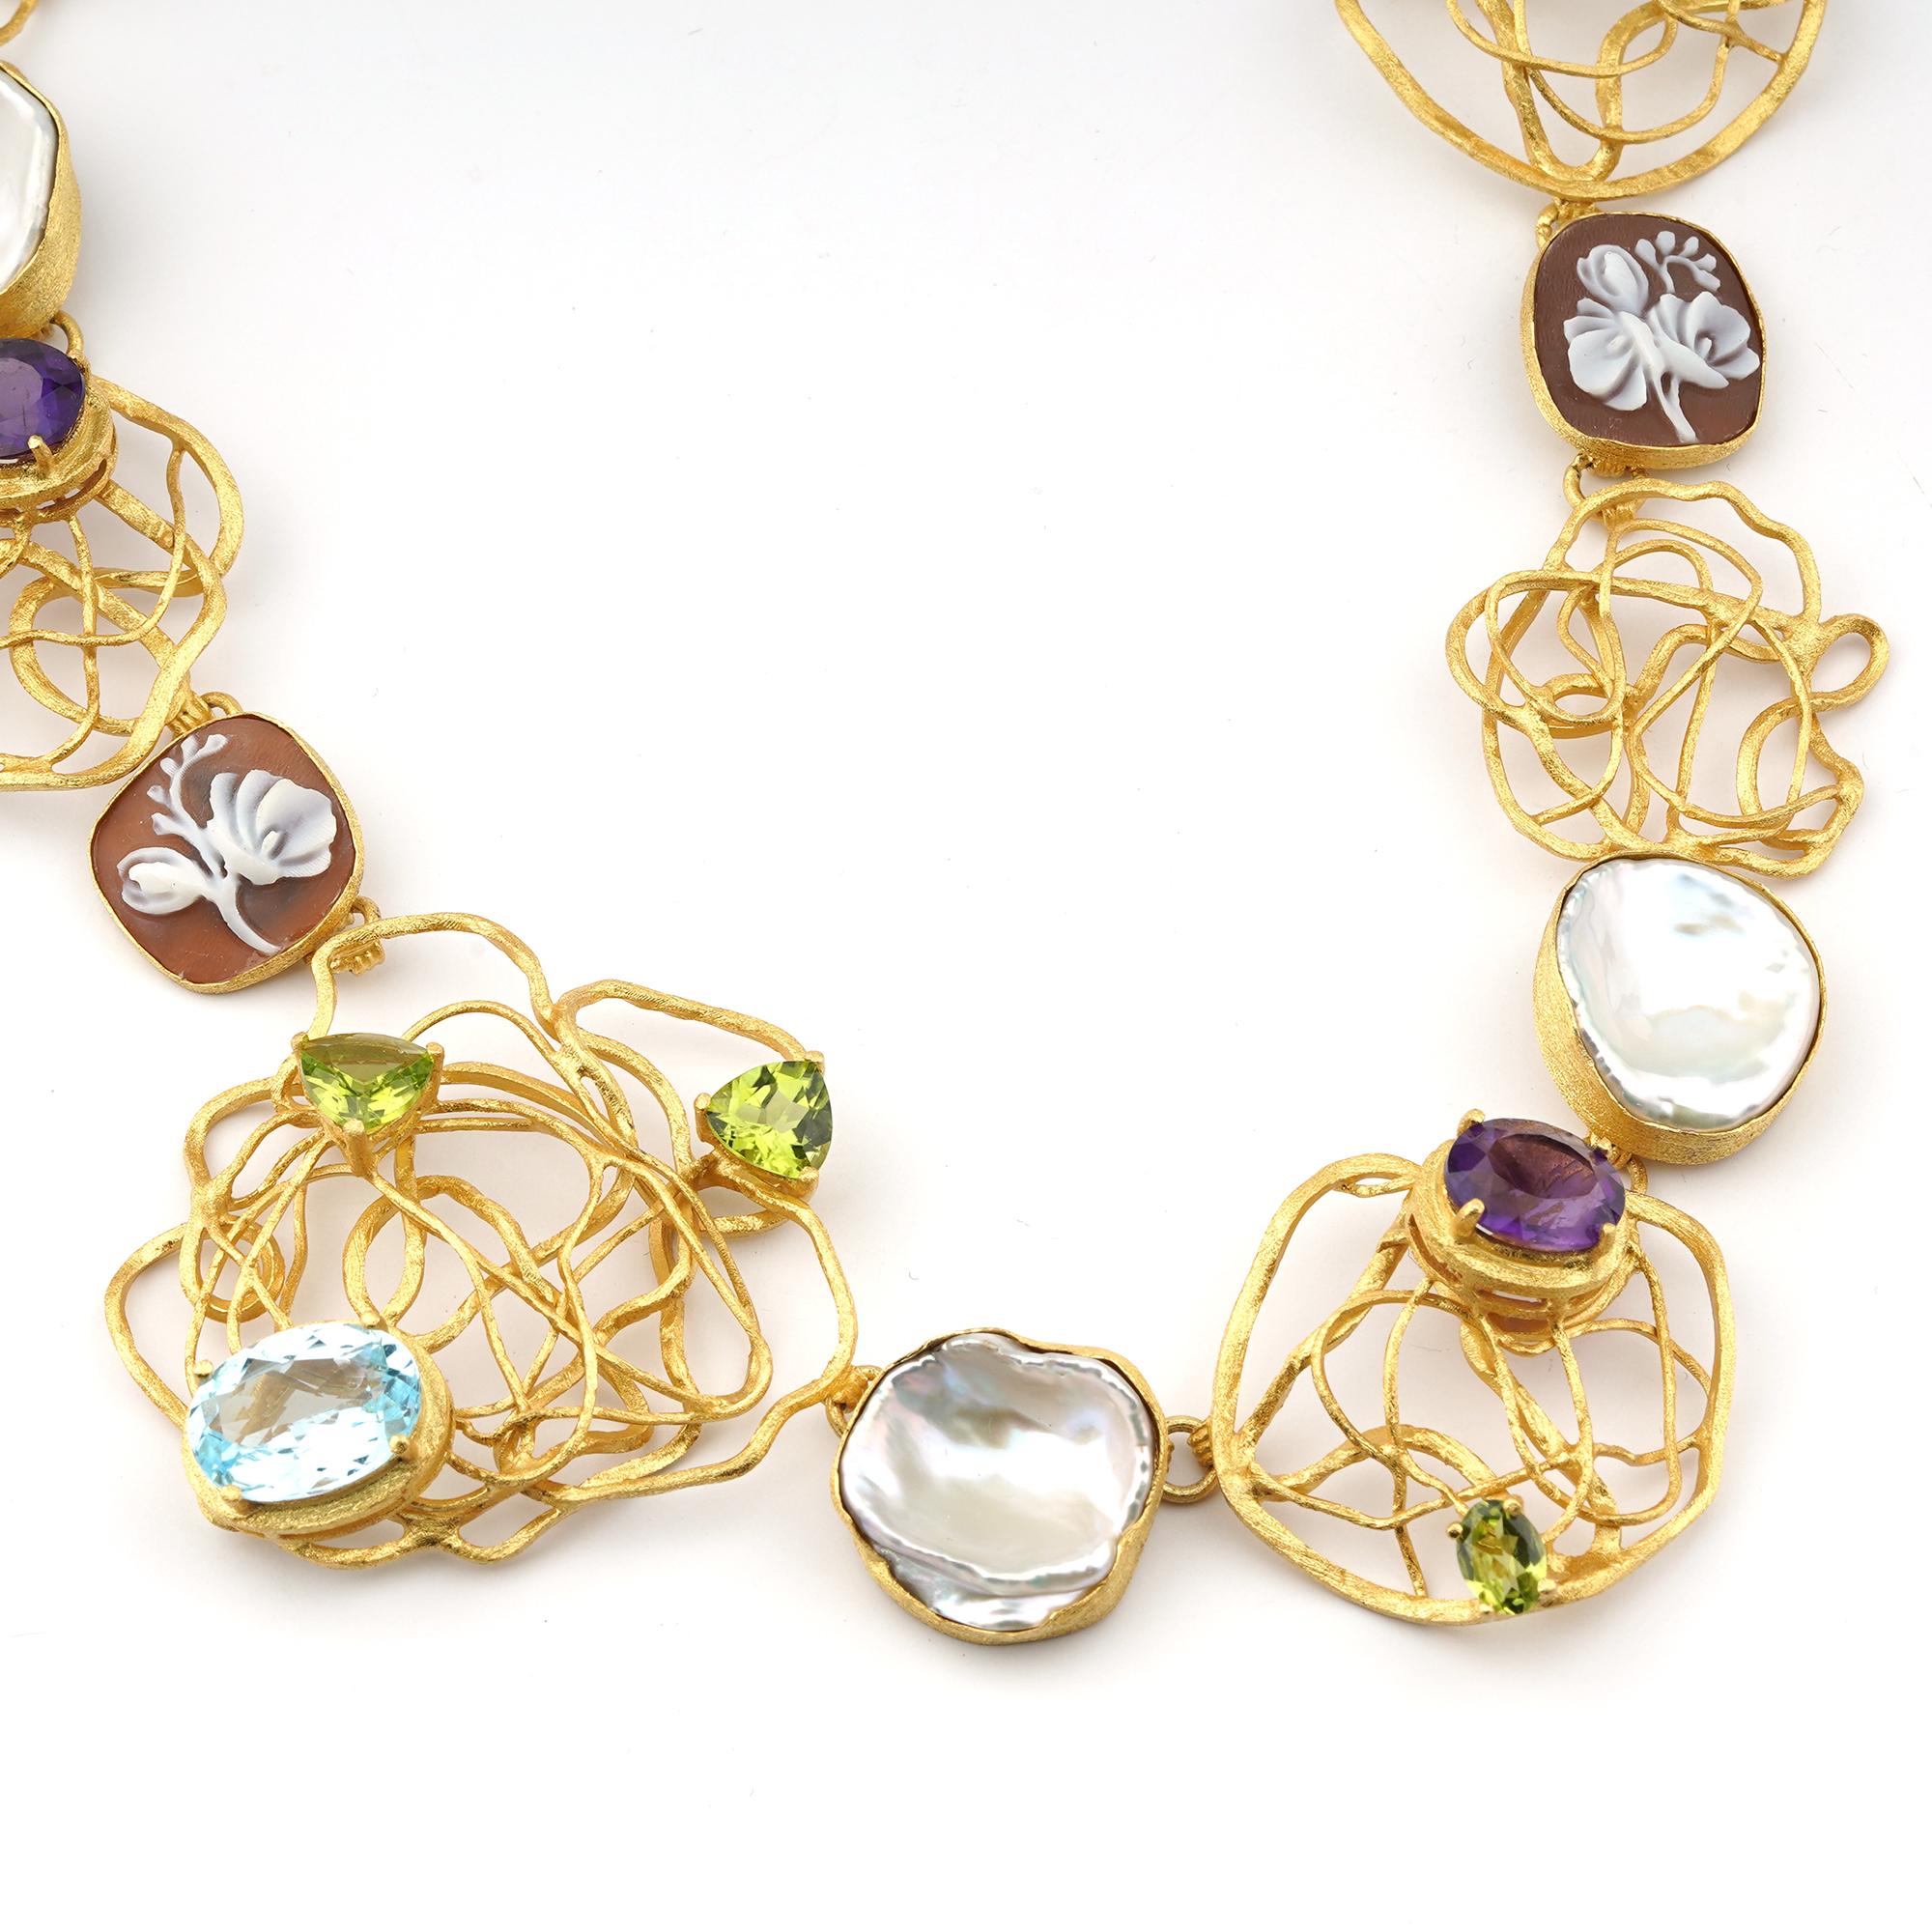 18 carat Gold Plated 925 Sterling Silver Sea Shell 16/18mm cameos Necklace 45cm. Fully handcarved Flowers on a sea shell cameo set in a 18kt Gold plated silver necklace with Topaz, peridots and amethysts. Carvings are performed by our master